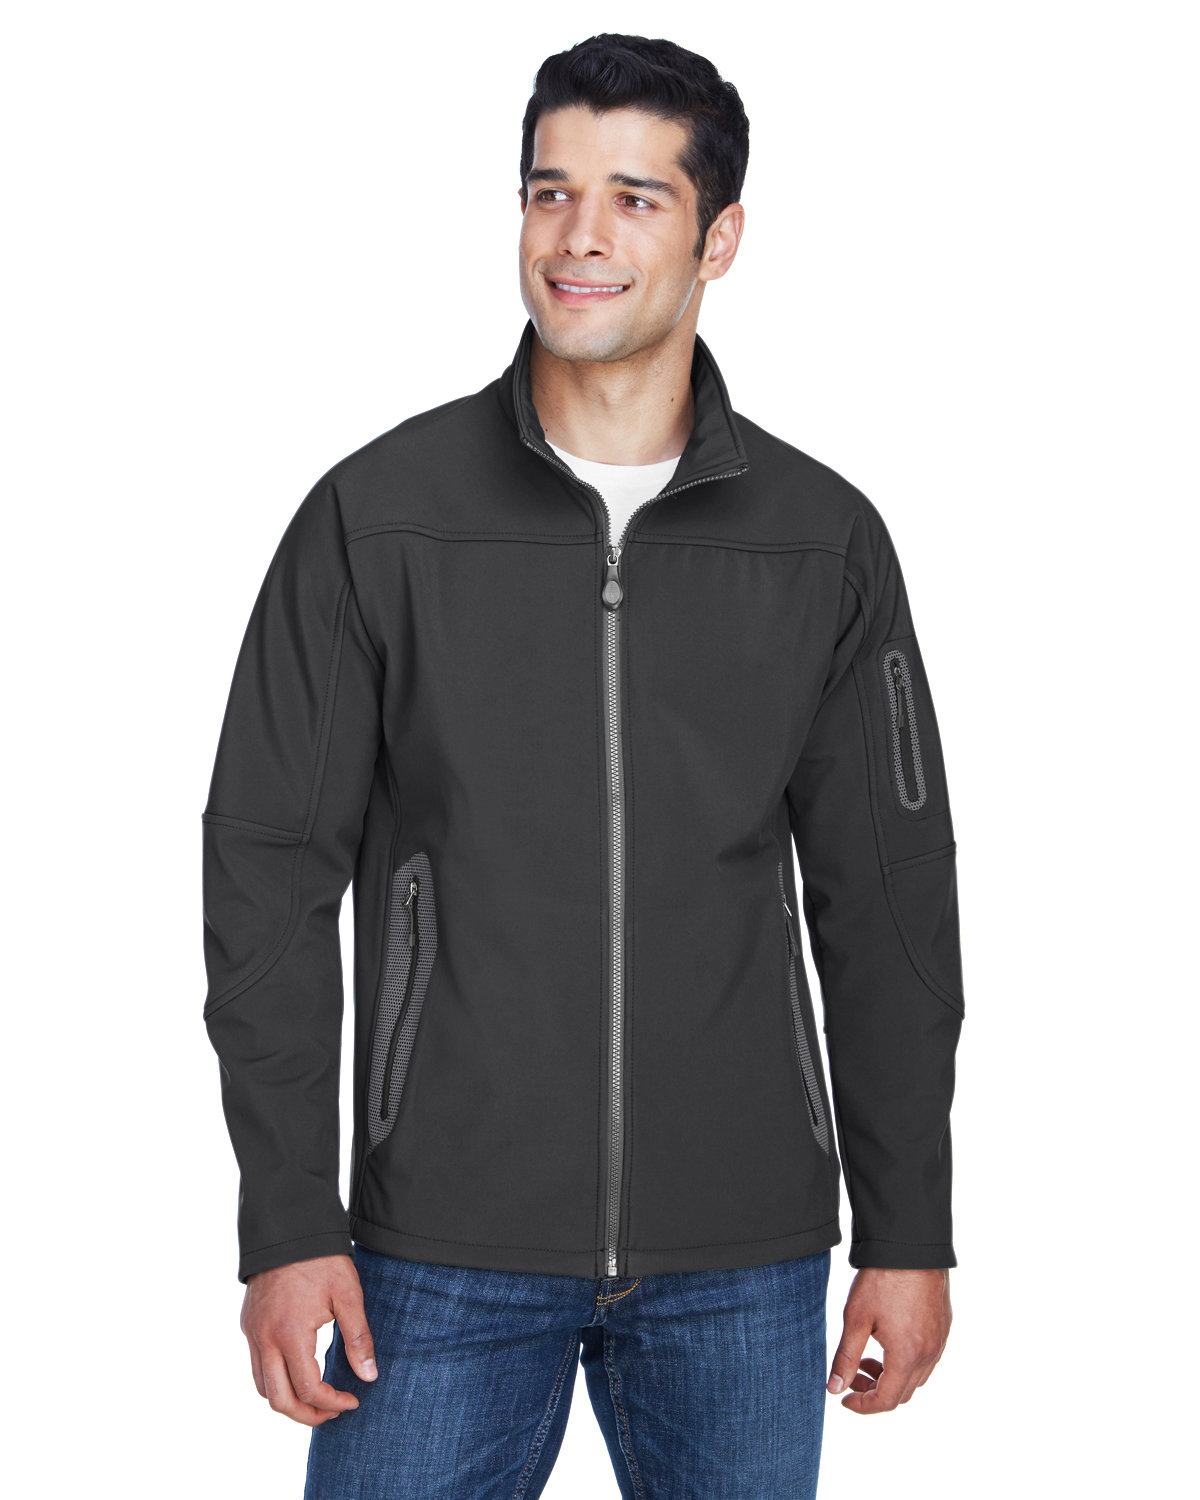 North End Men's Three-Layer Fleece Bonded Soft Shell Technical Jacket GRAPHITE 